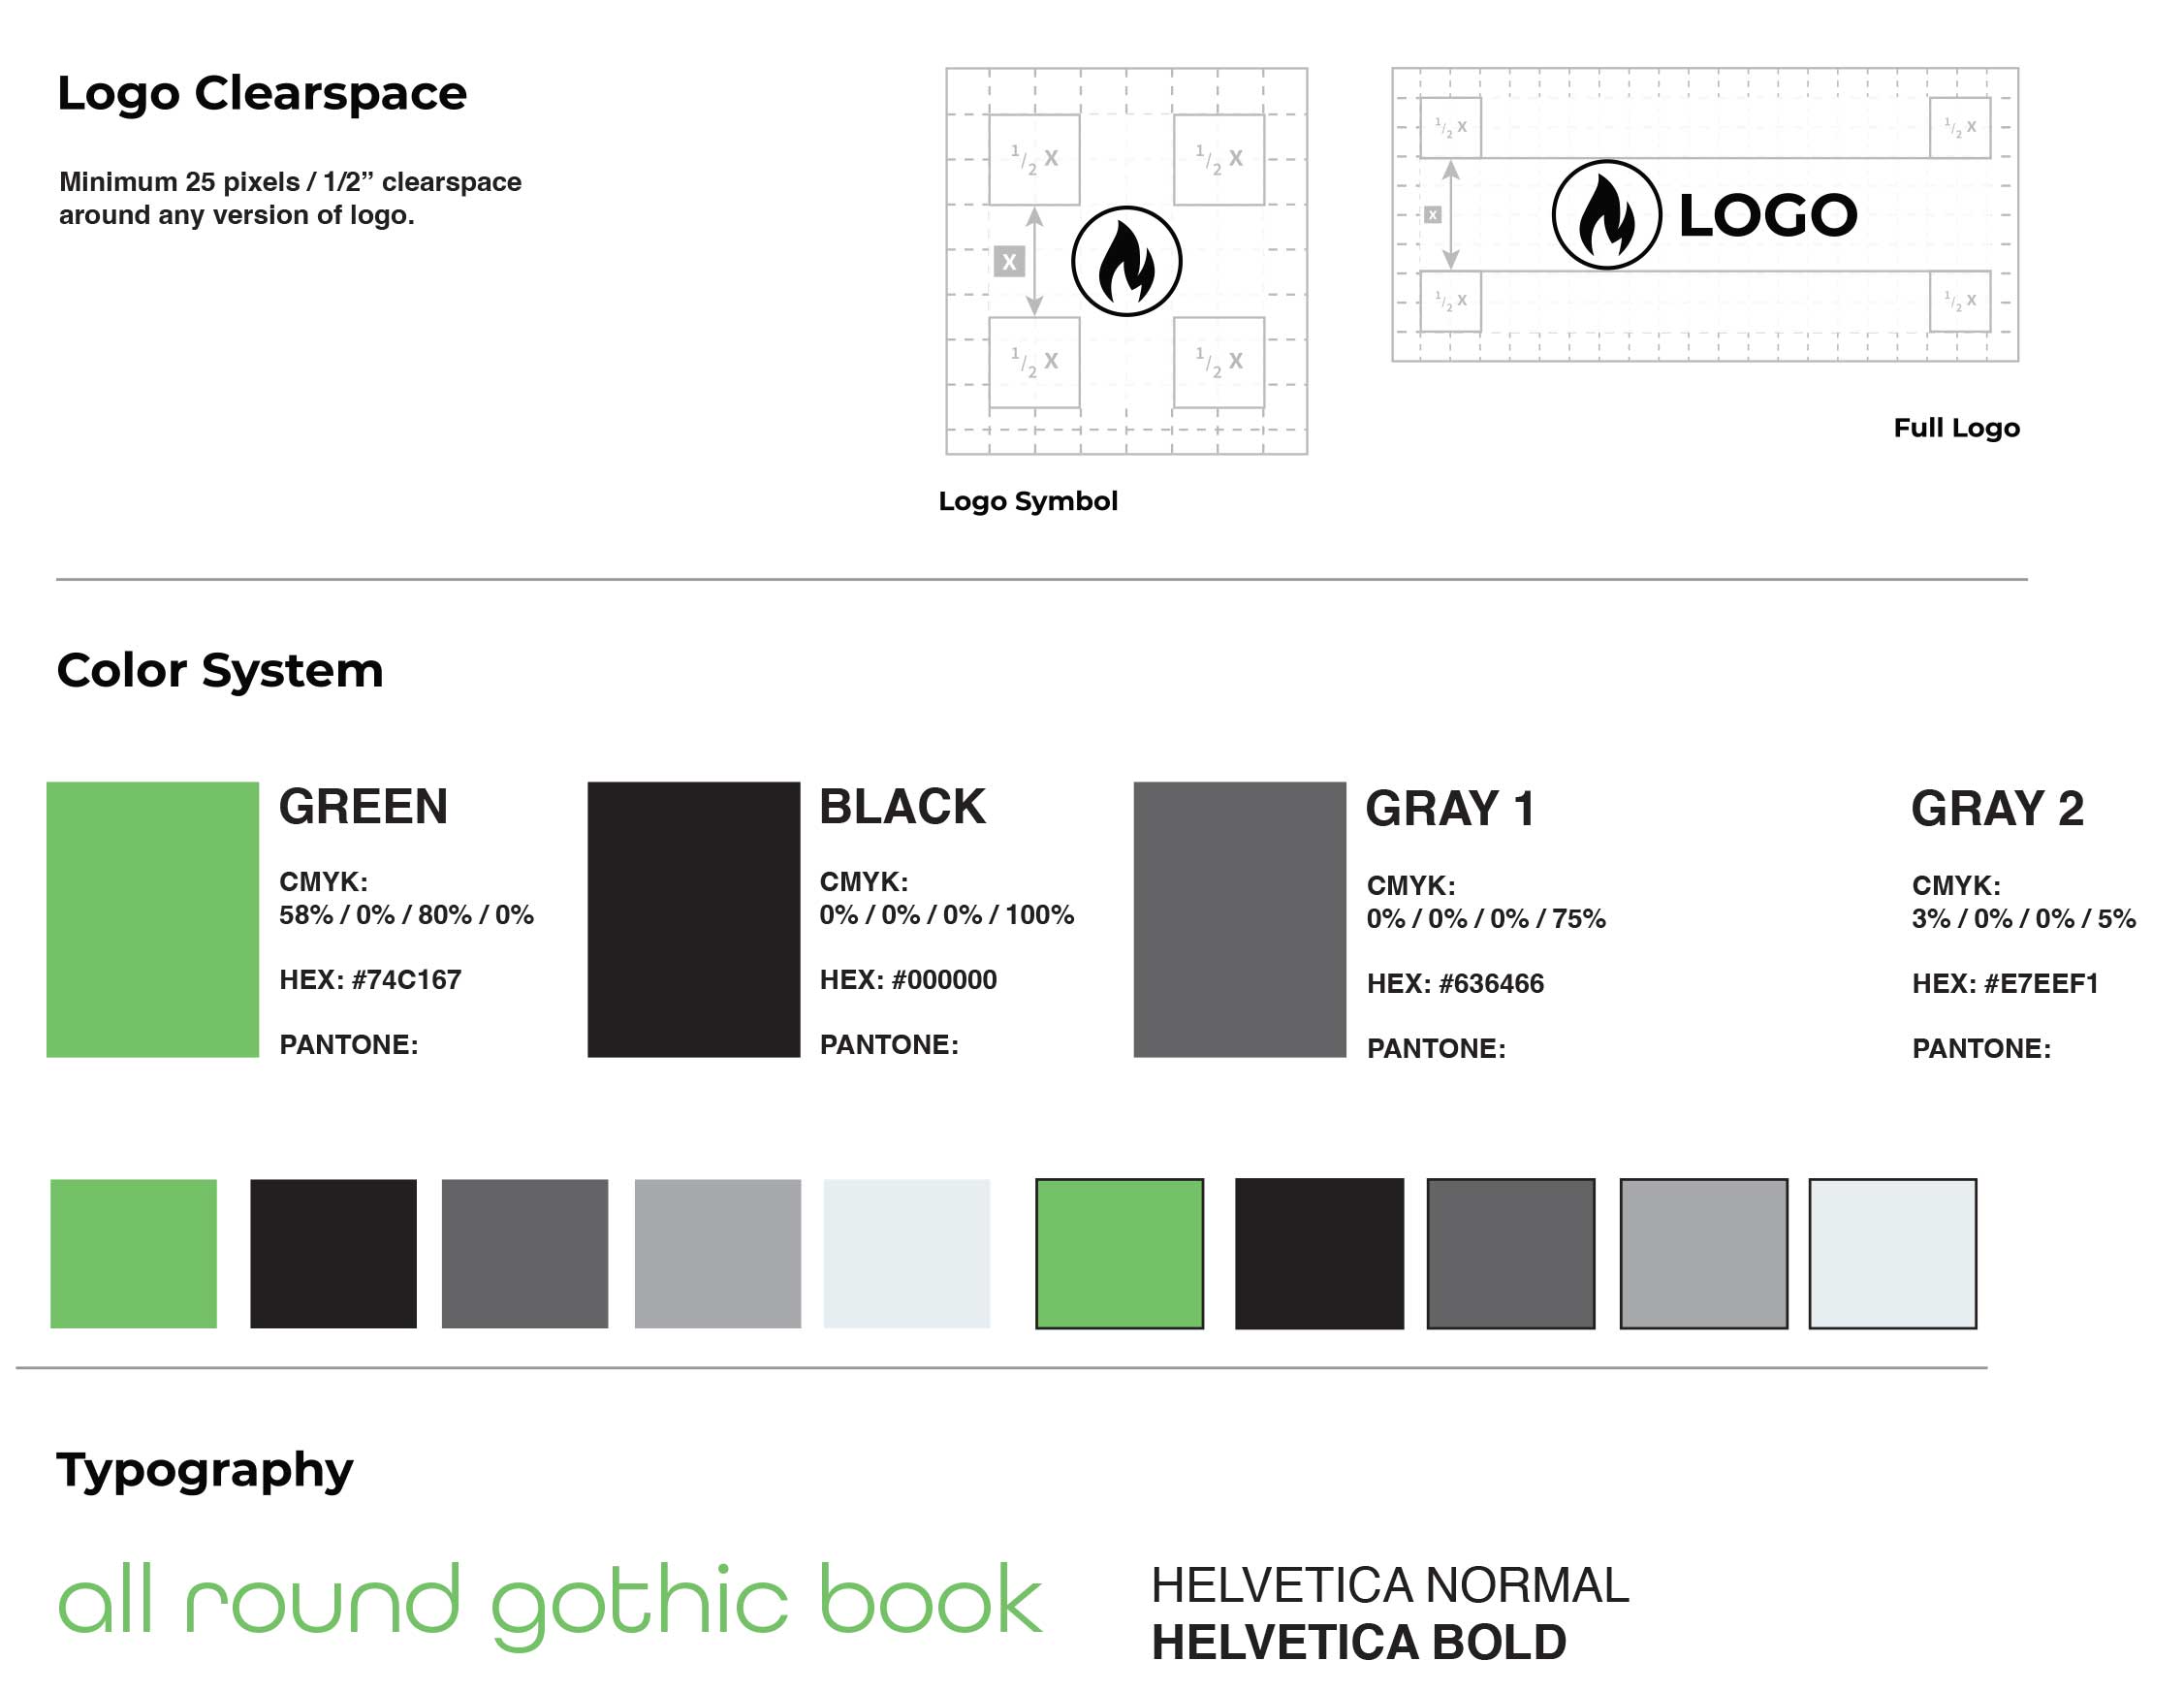 Brand guidelines can include colors, styles, typography and much more